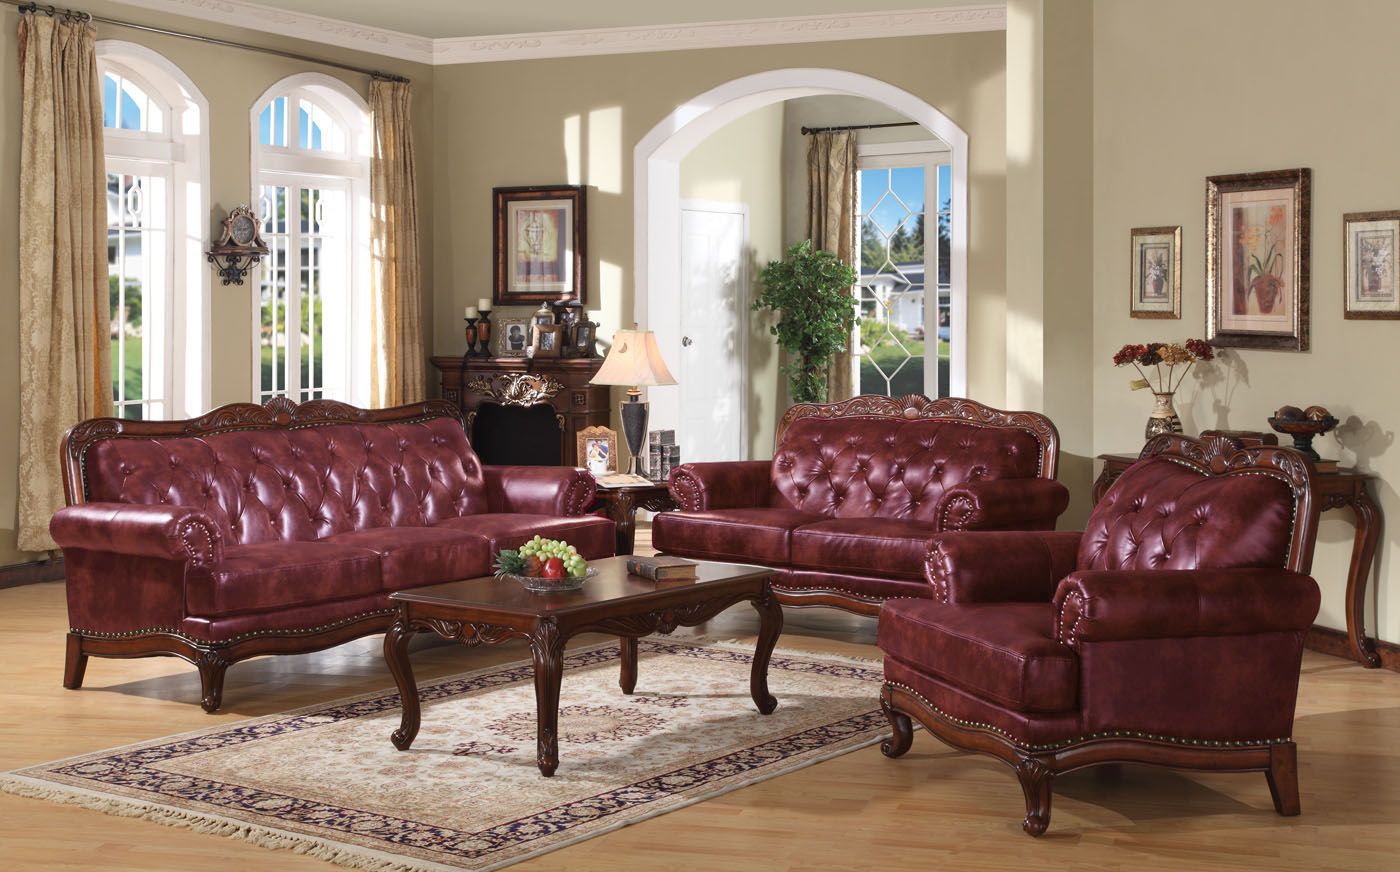 Traditional Burgundy Tufted Leather Sofa Loveseat Chair